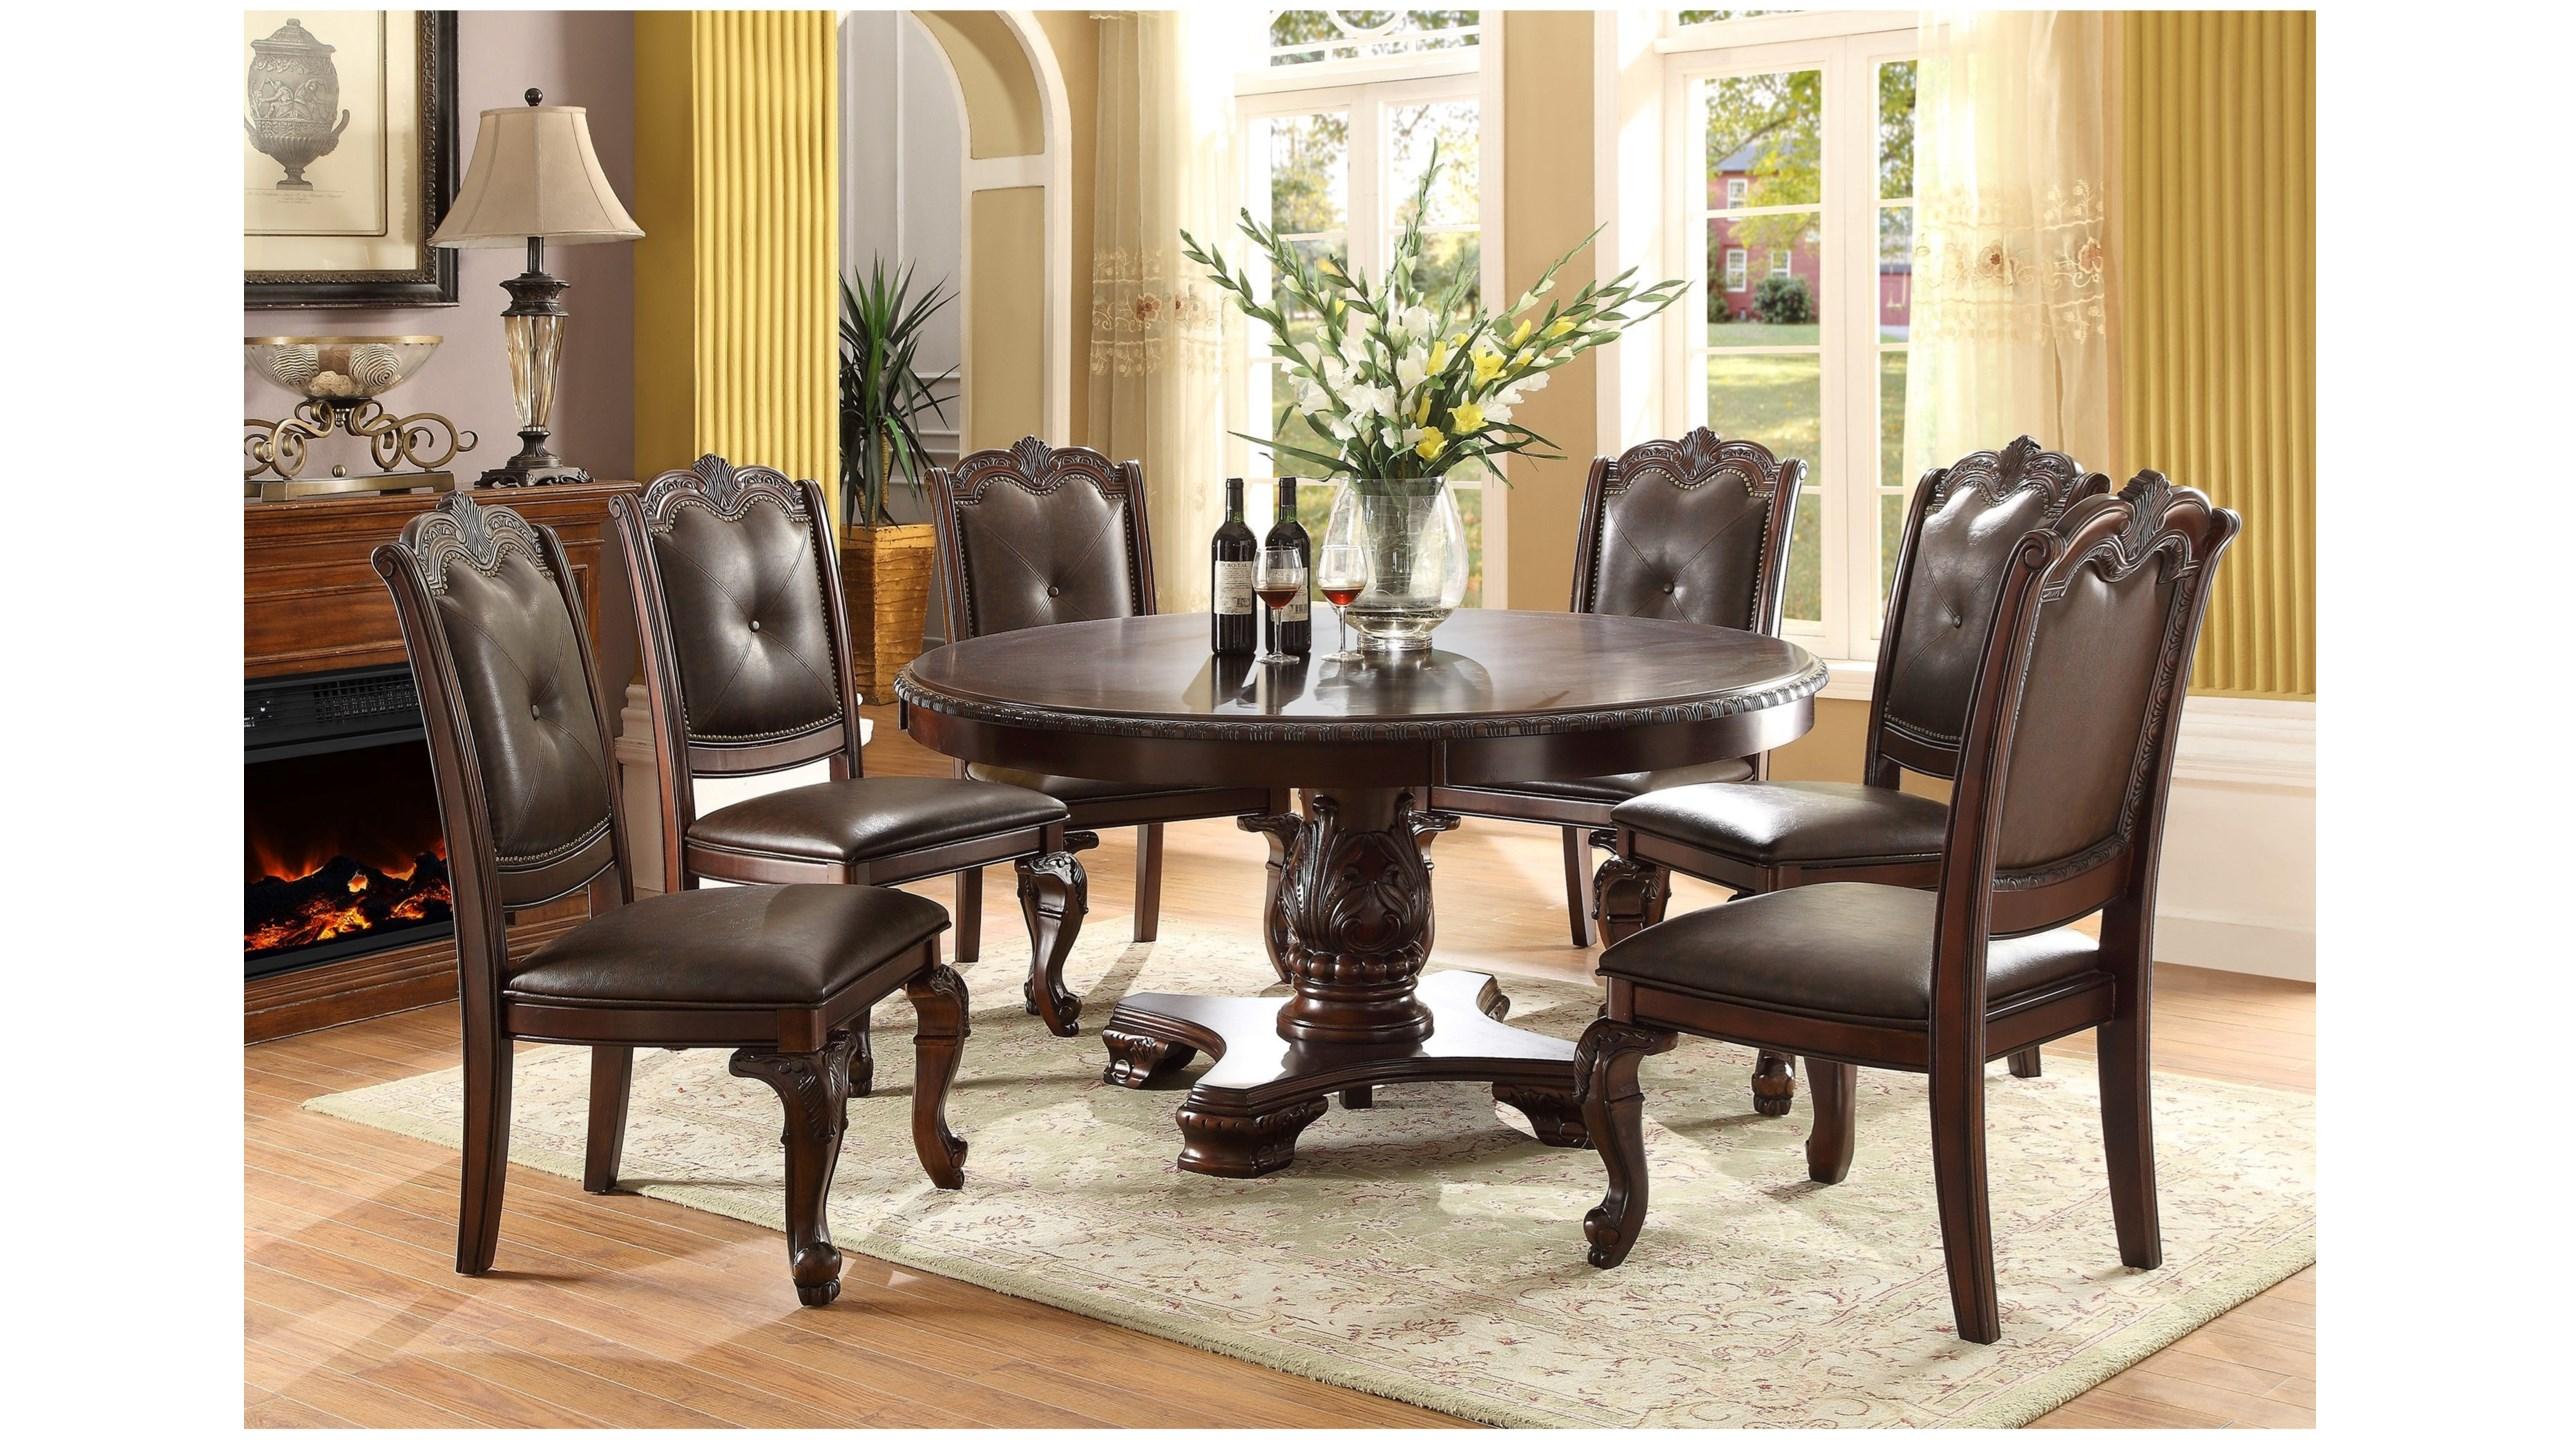 

    
Espresso Dining Round Table + 6 Chairs by Crown Mark Kiera 2150T-60-7pcs
